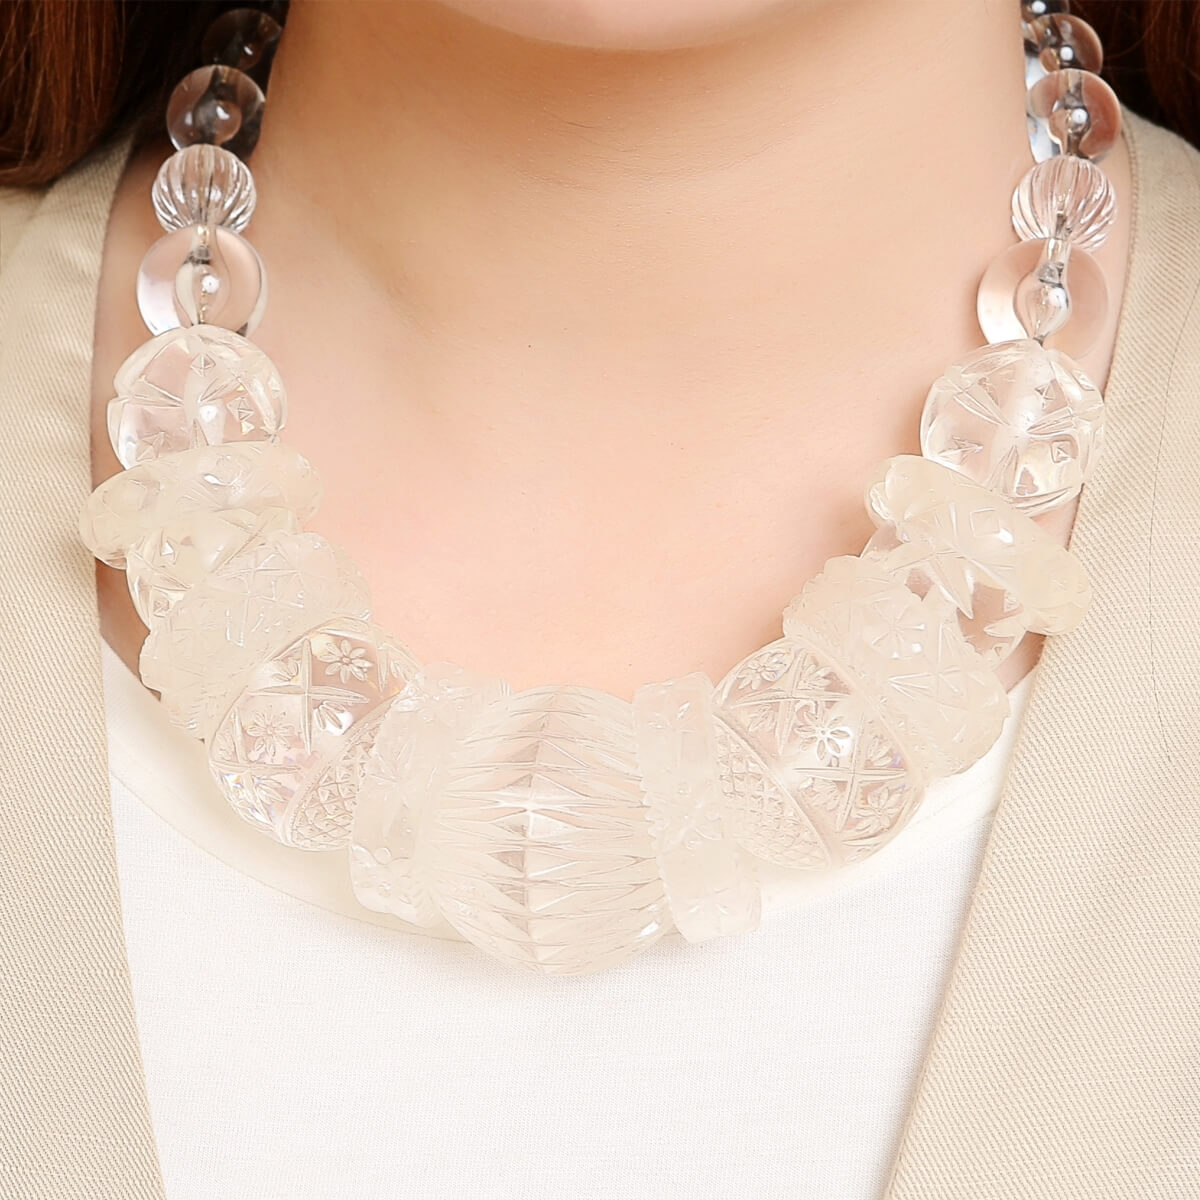 [MADE-TO-ORDER] Statement Collar Necklace Vintage Clear